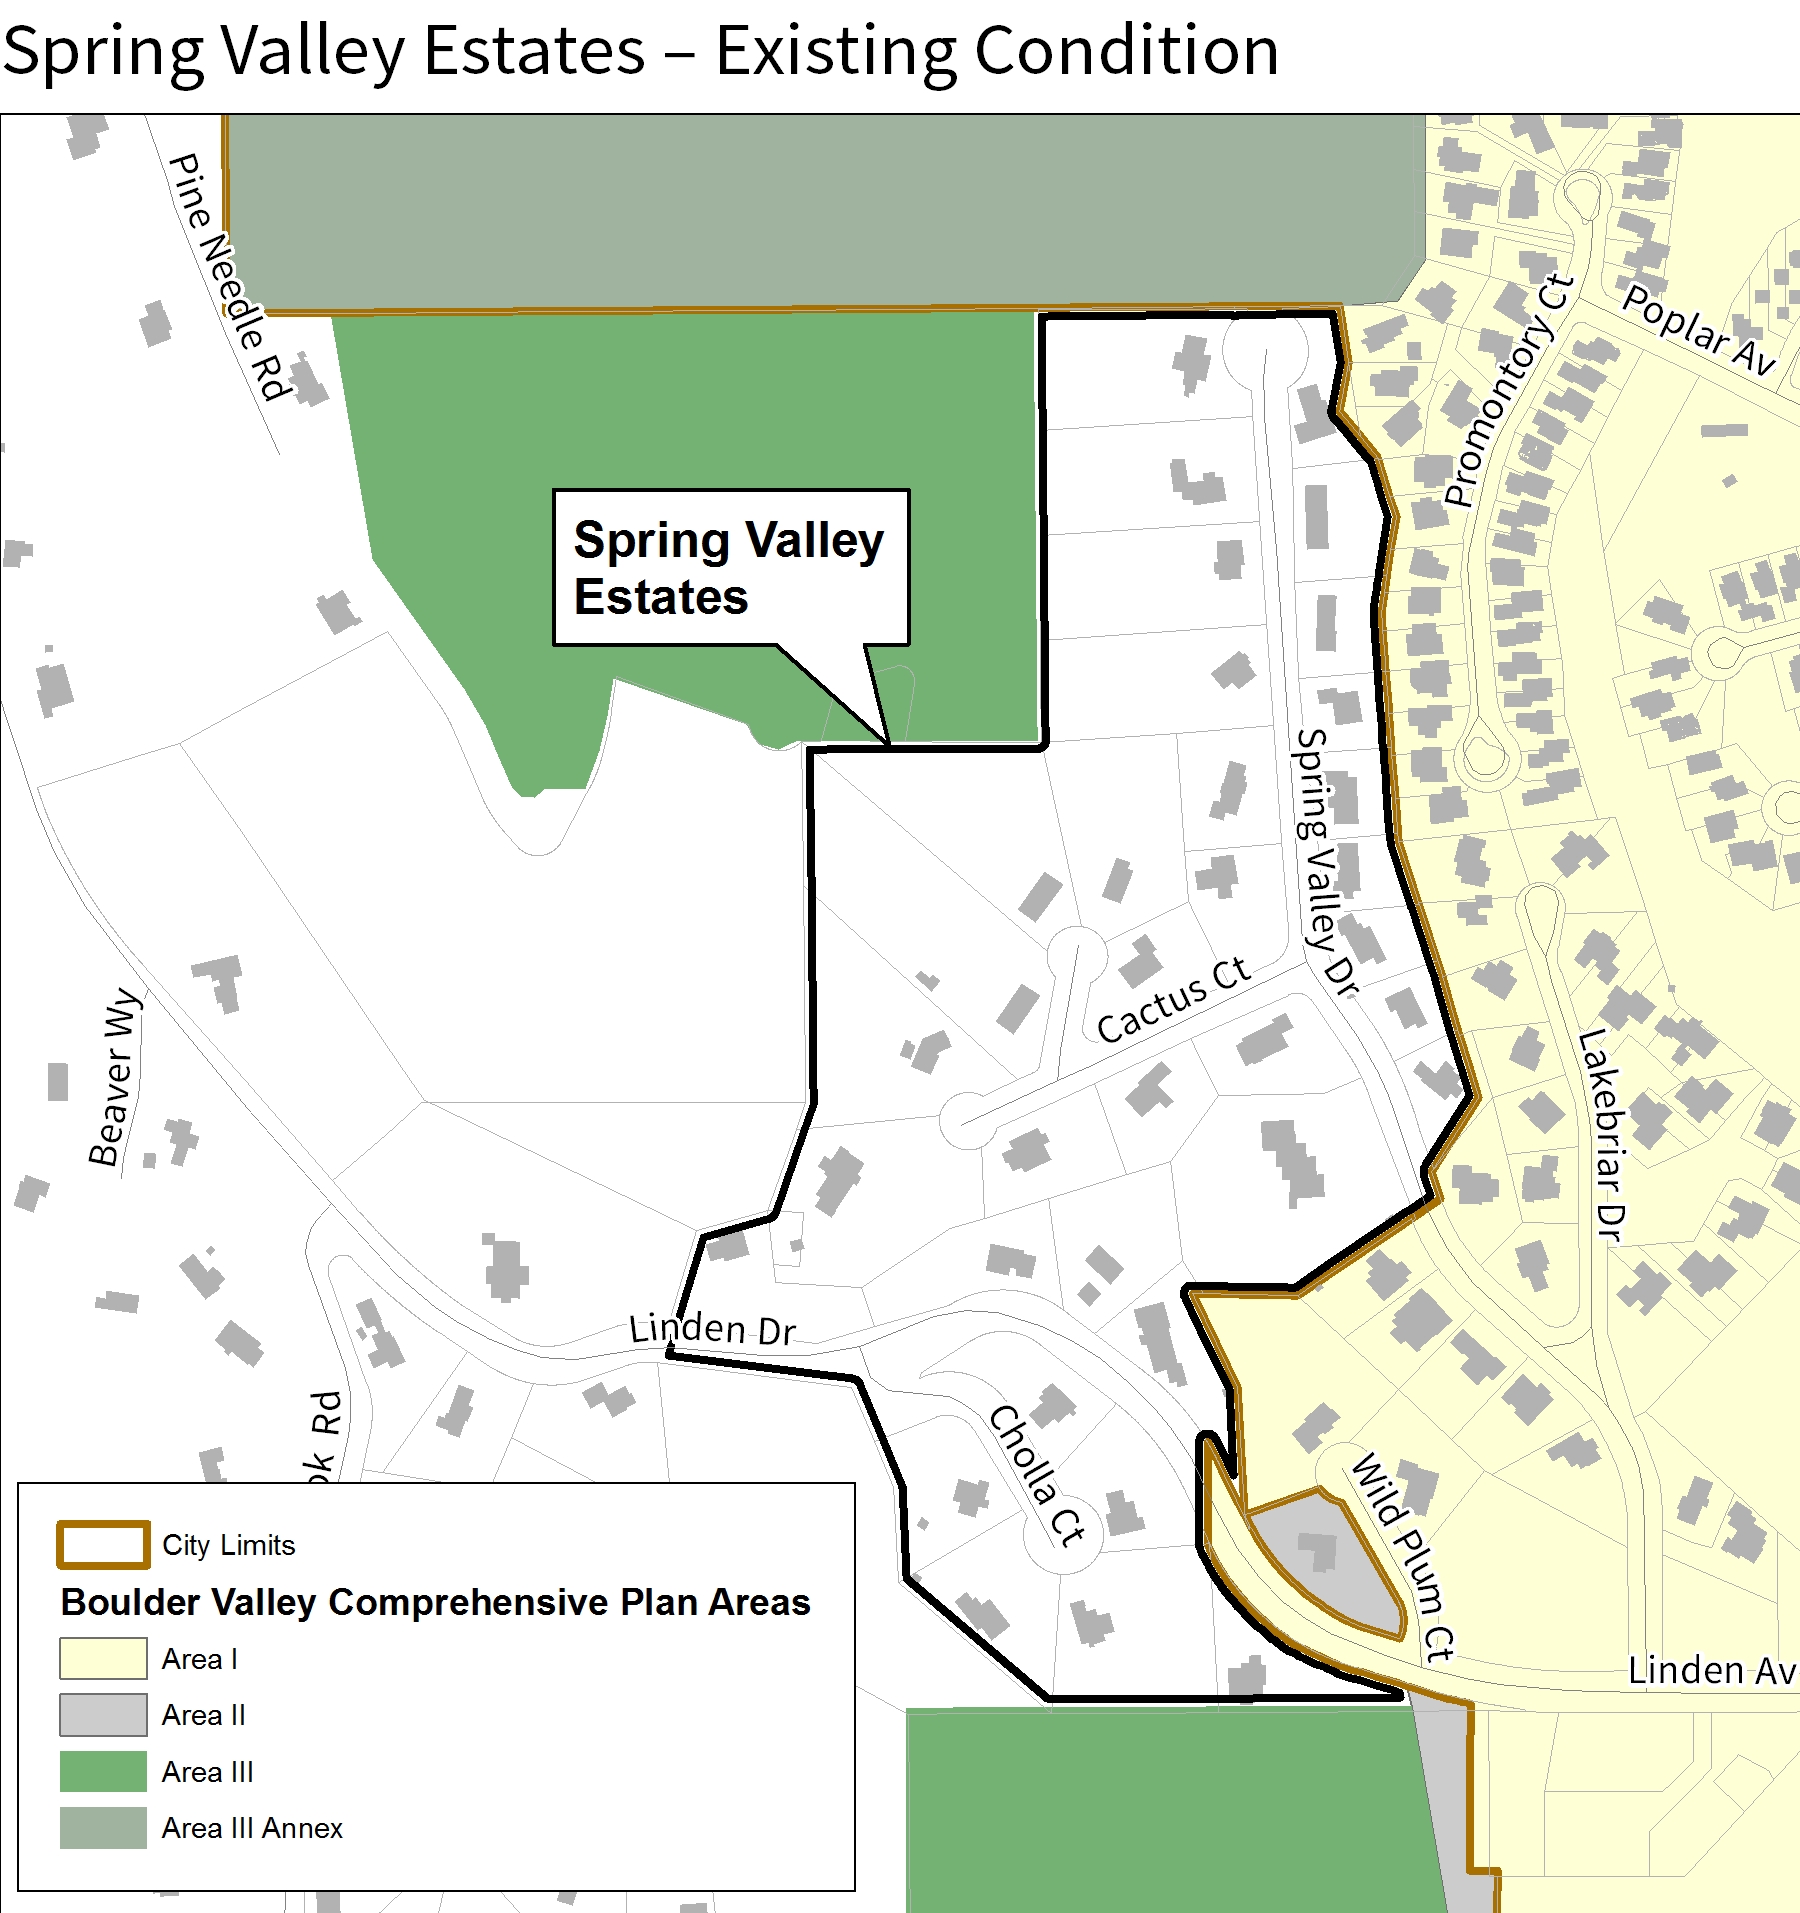 Existing Planning Area Designation:  Outside the Planning Area Boundary